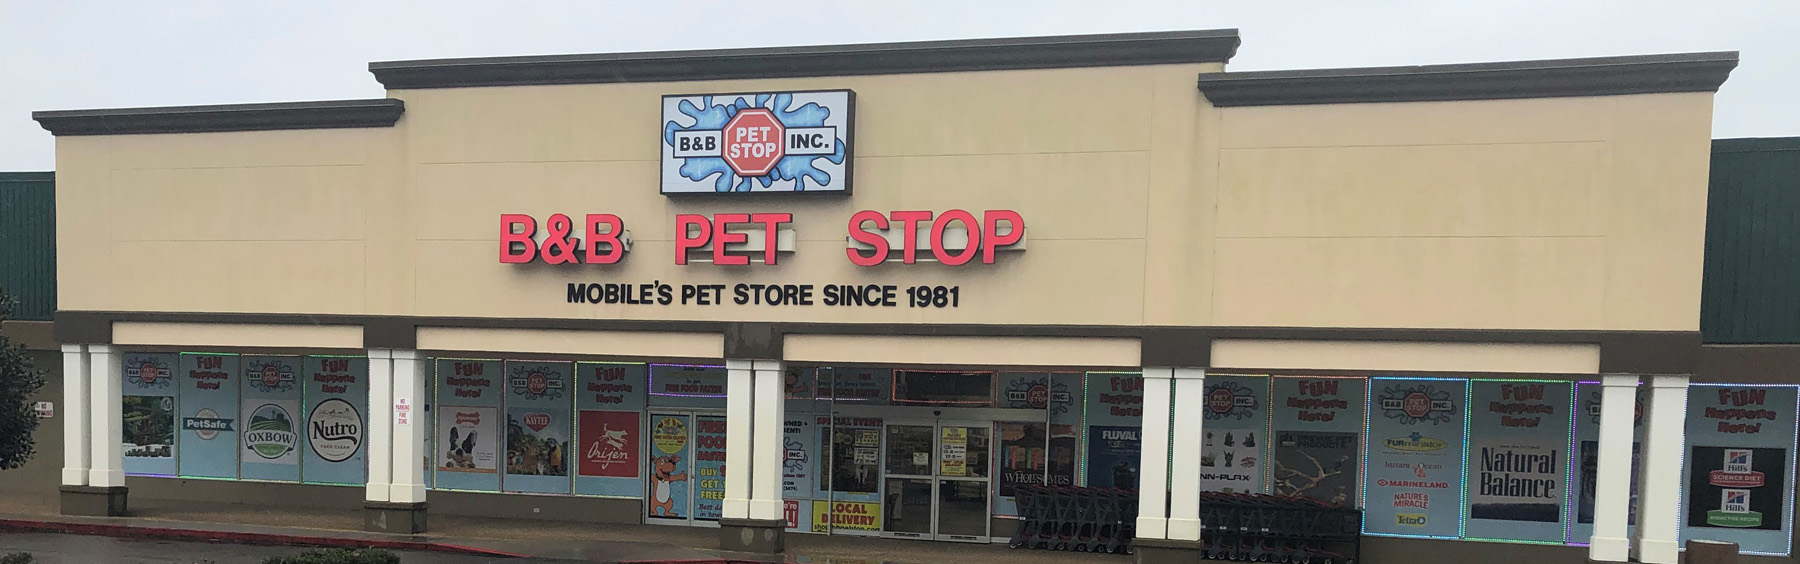 View of B&B Pet Stop store front